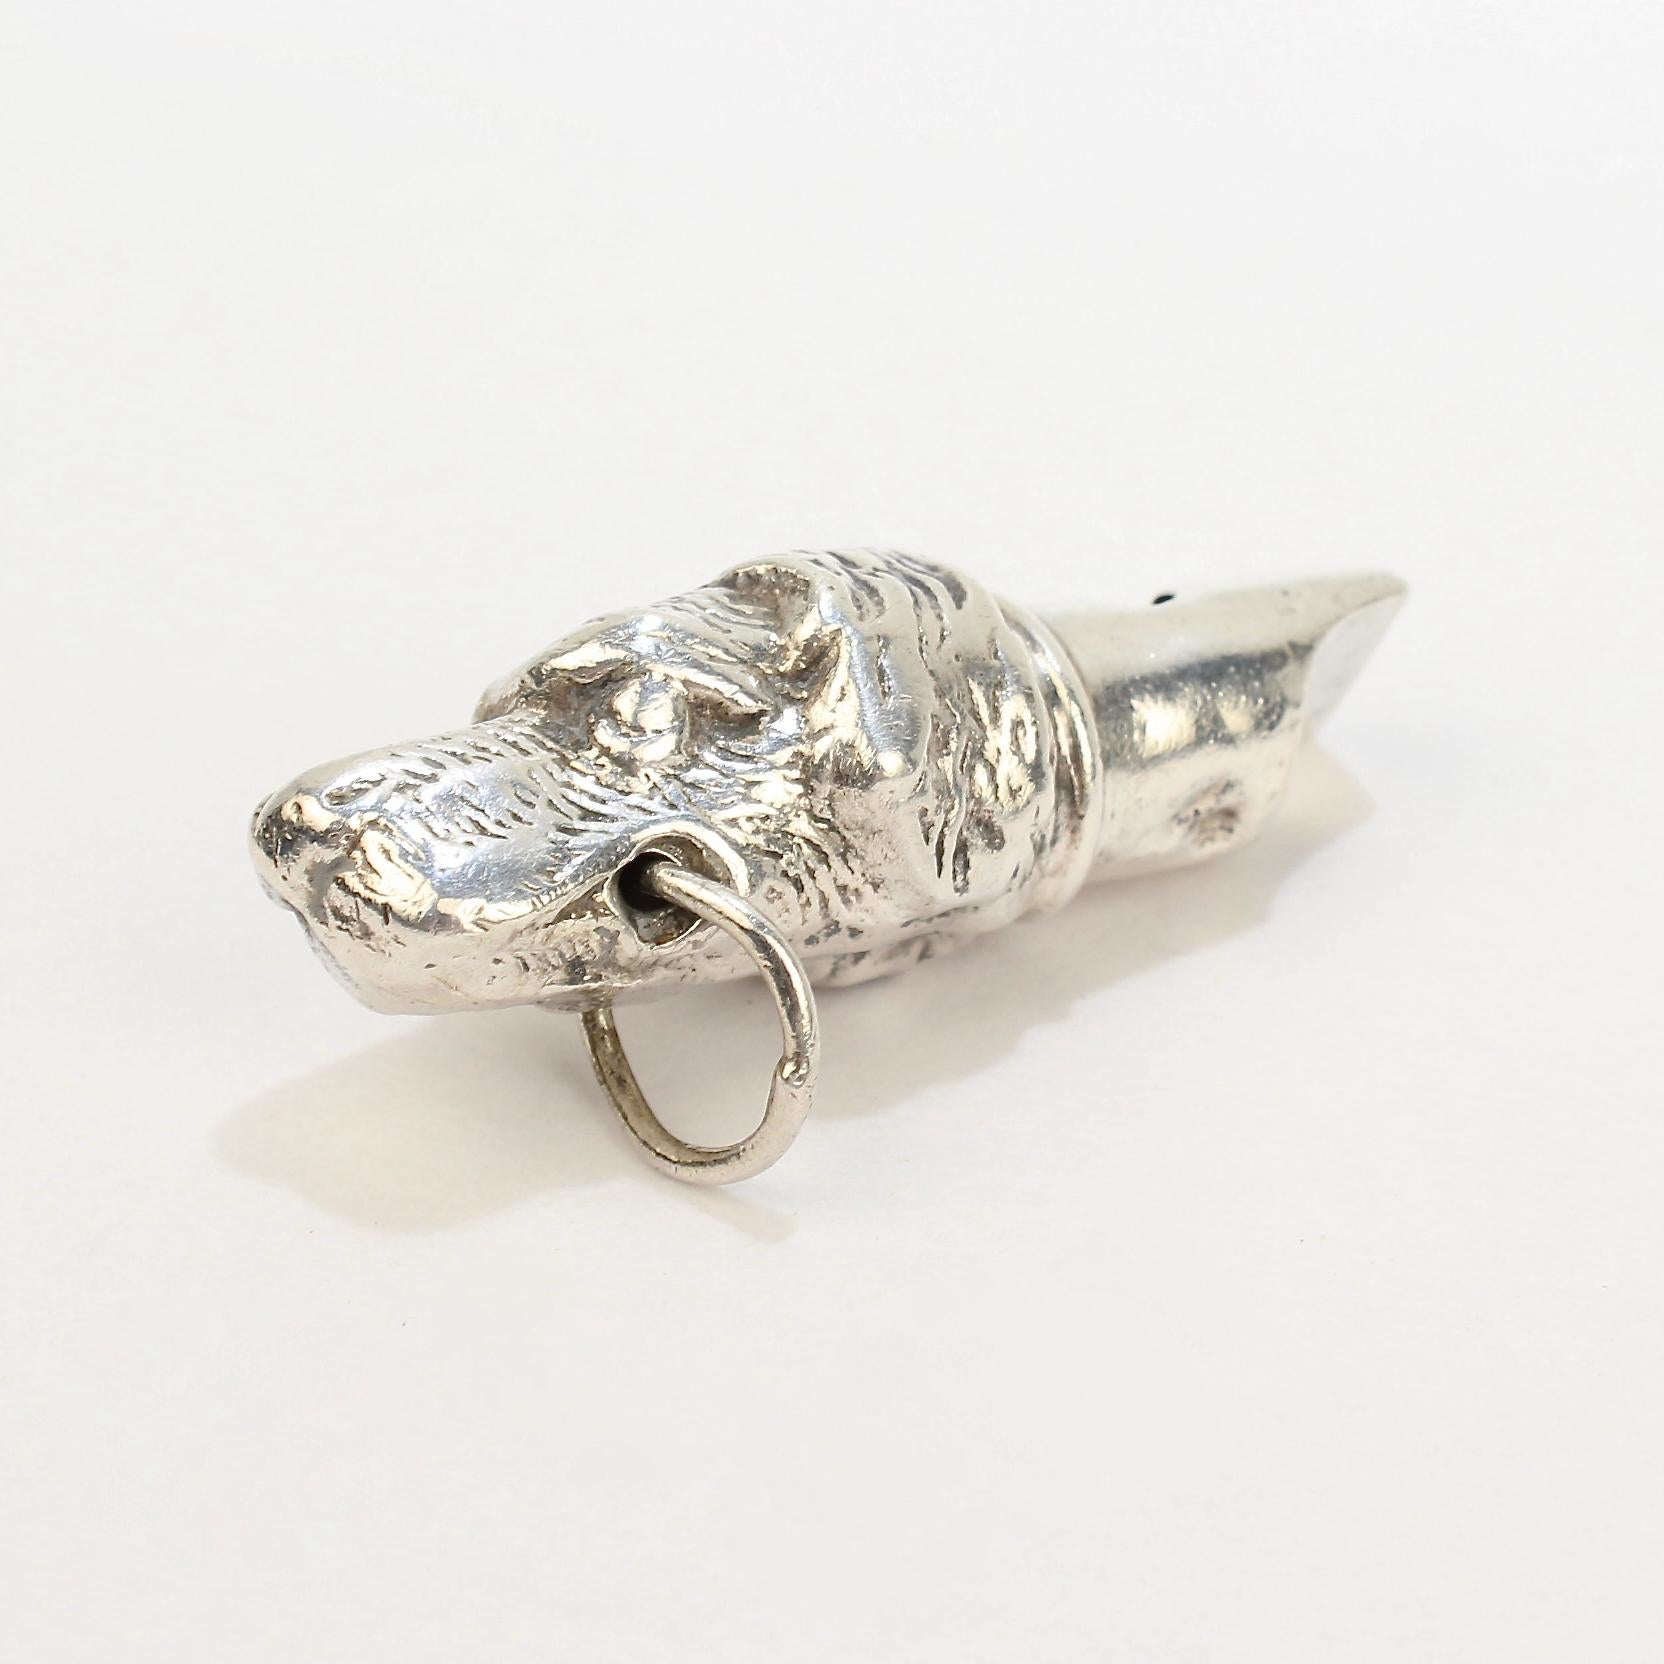 Figural Sterling Silver Dog Whistle from the Mario Buatta Collection For Sale 3